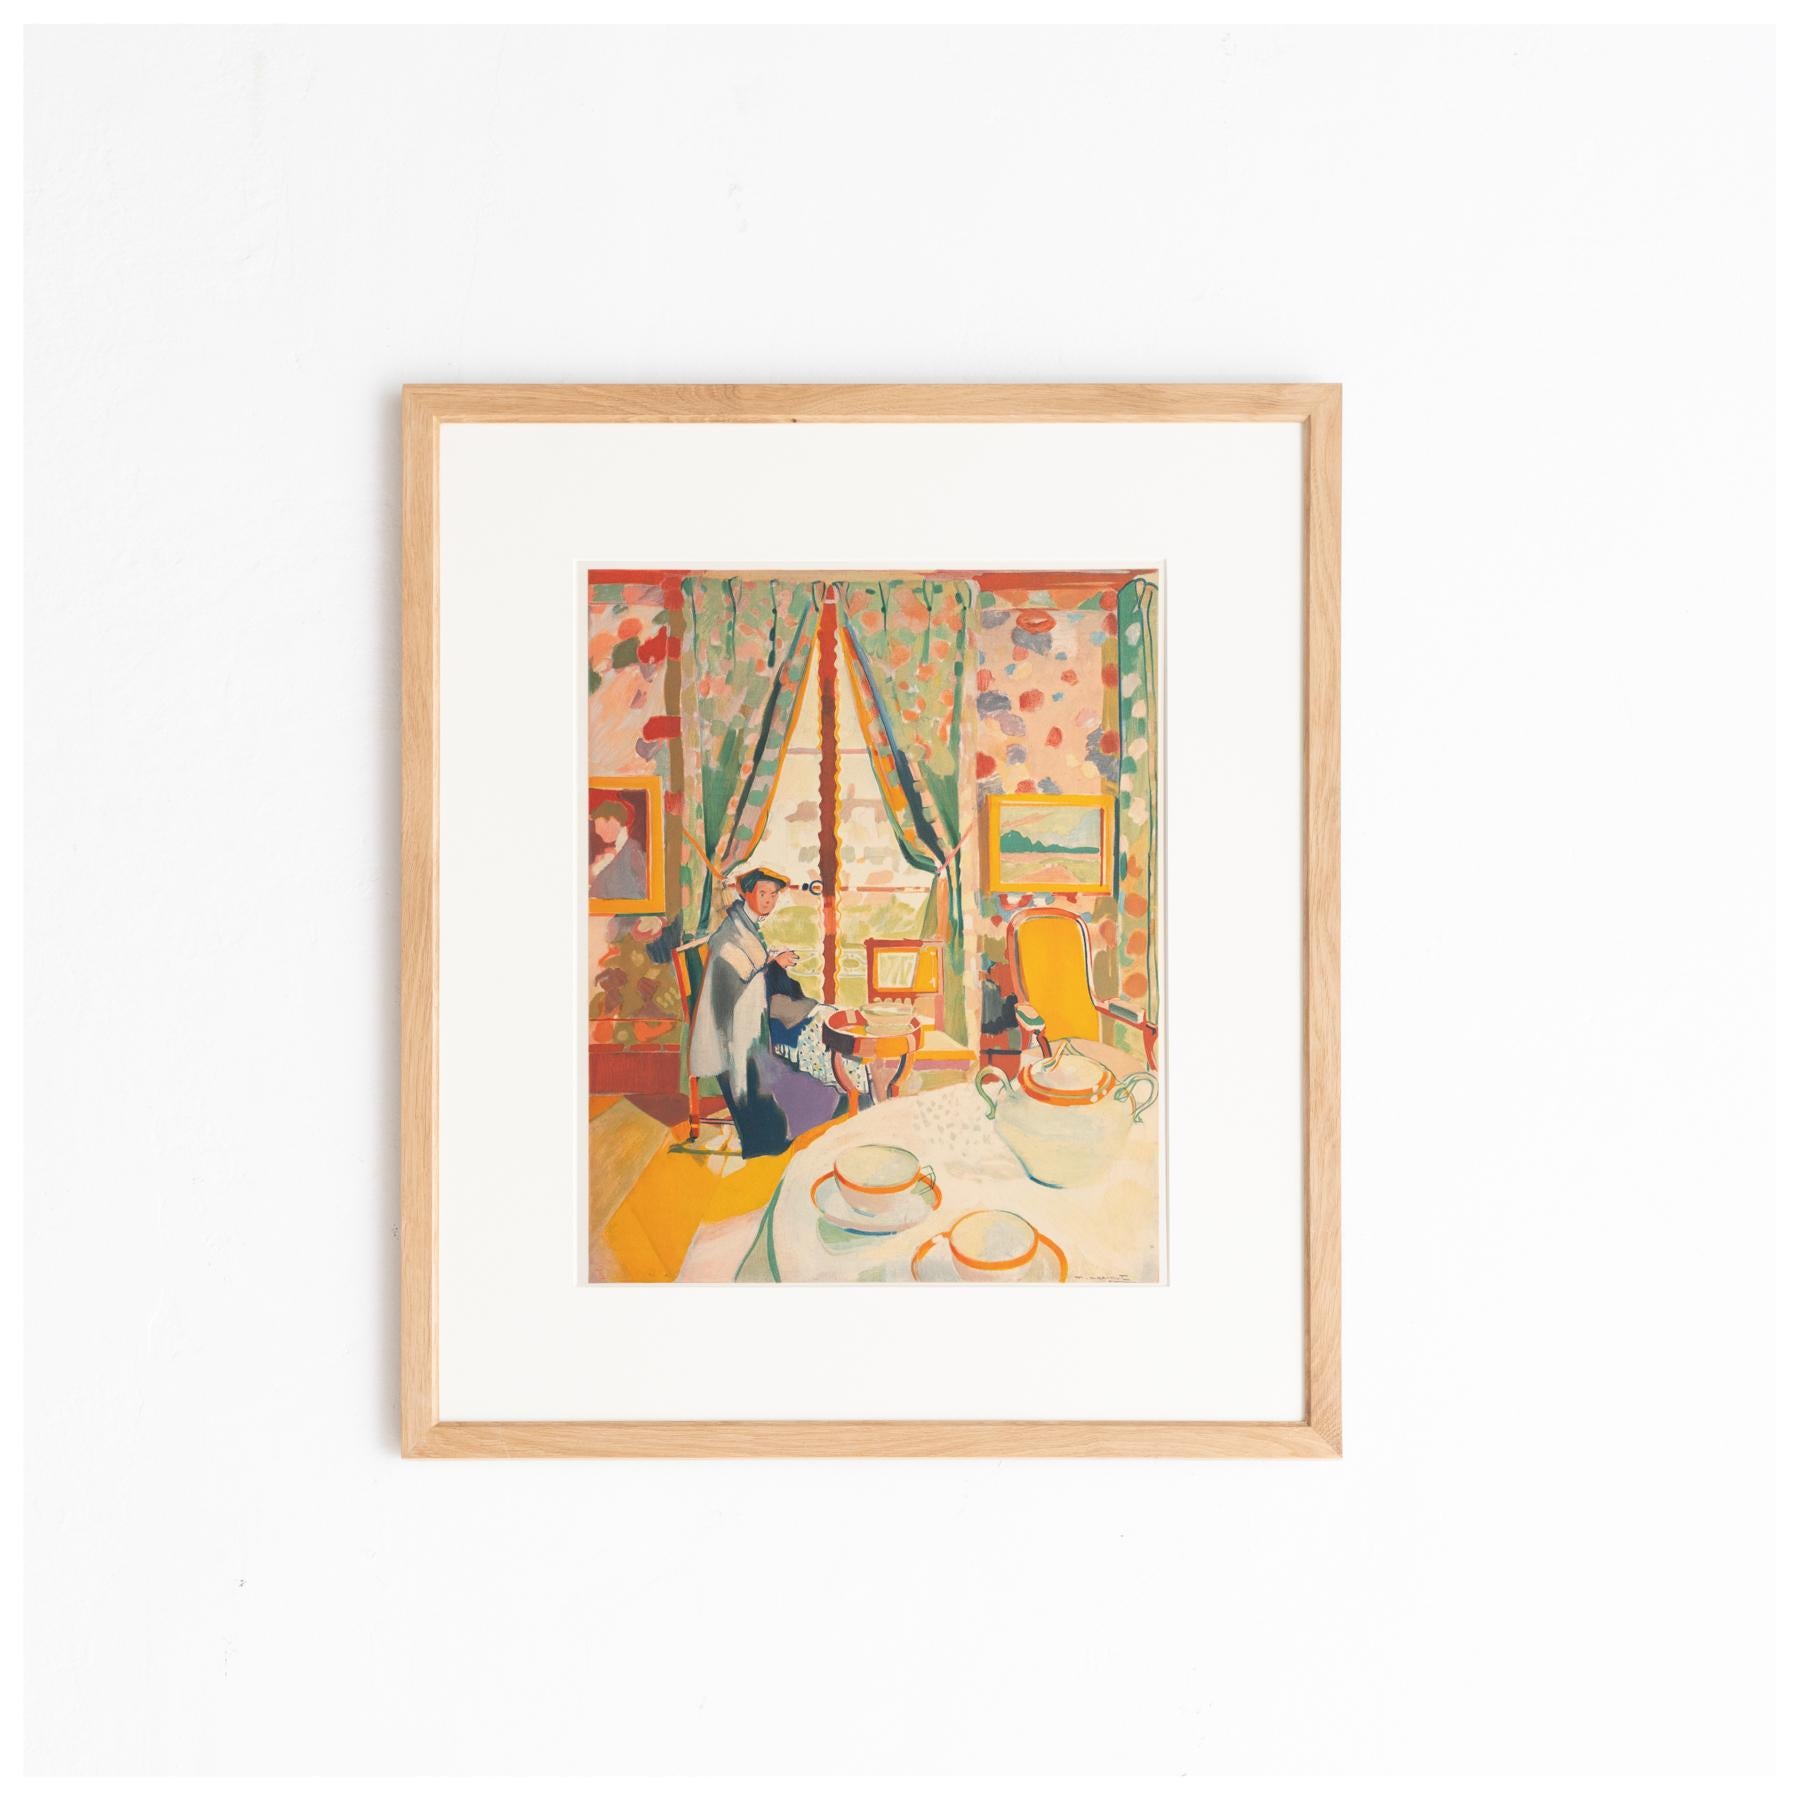 European Maurice Marinot 'Intérieur' Limited Edition Lithograph, circa 1972 For Sale